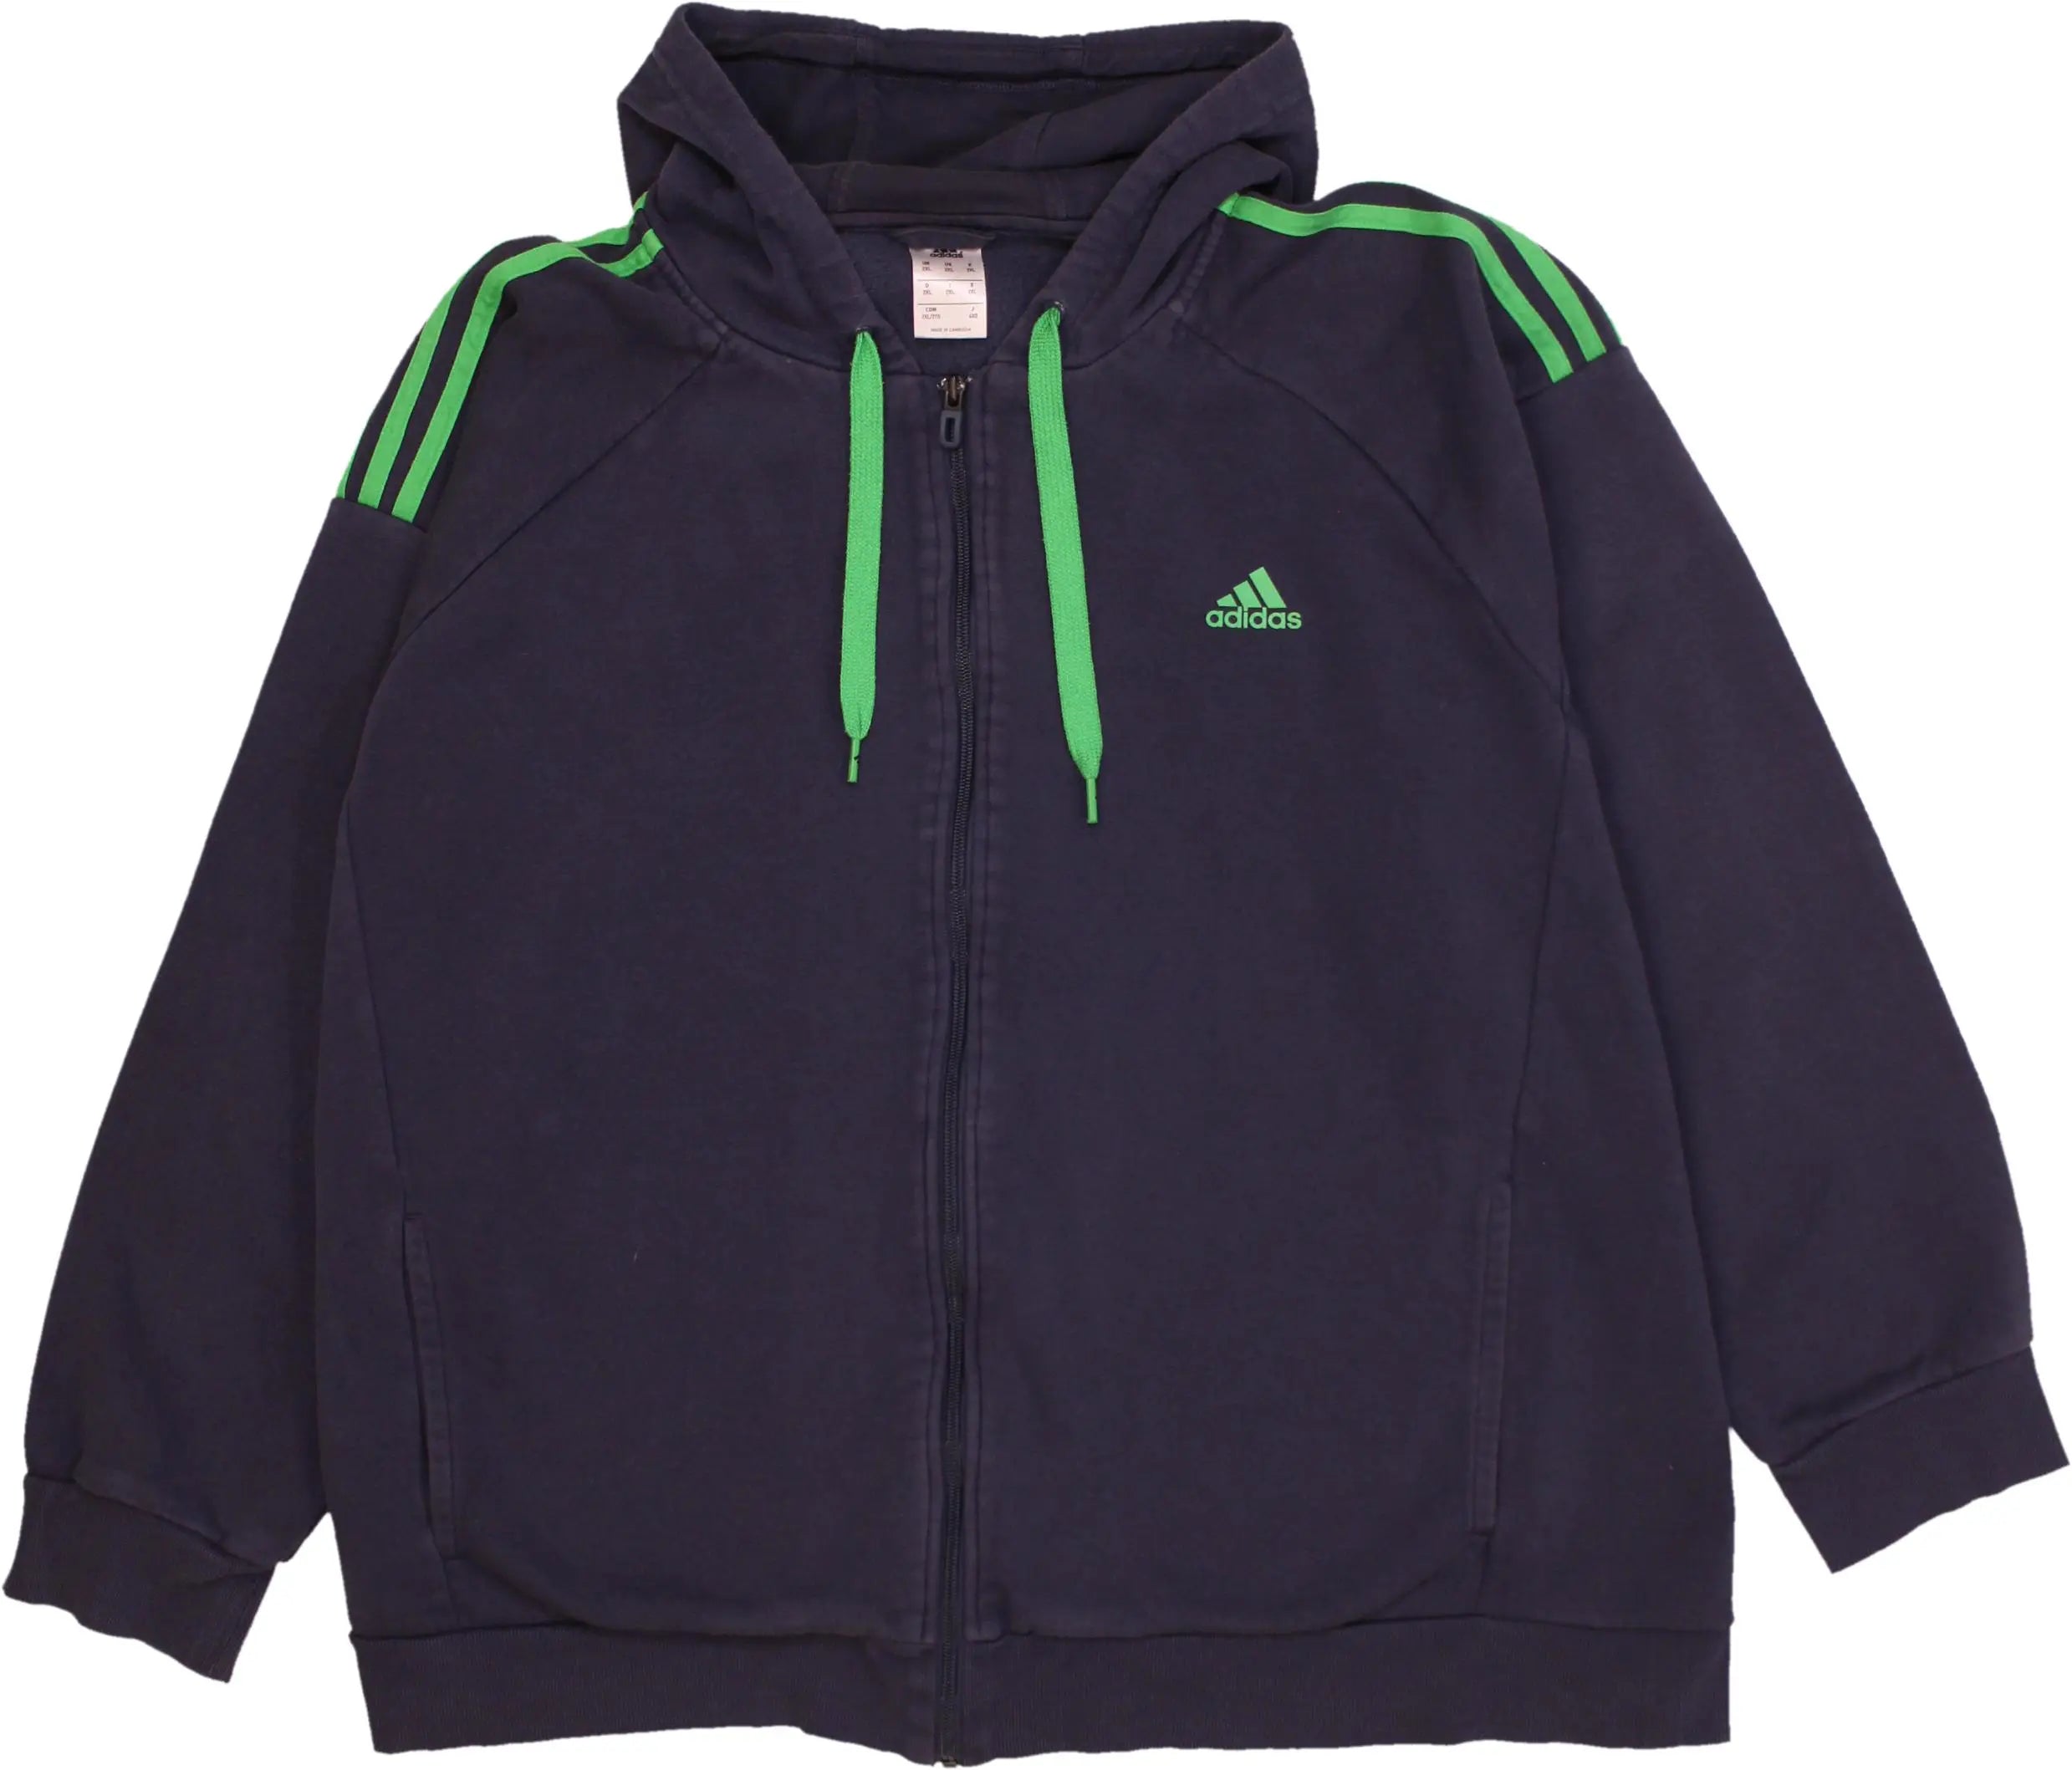 Adidas - Hoodie with Zipper by Adidas- ThriftTale.com - Vintage and second handclothing